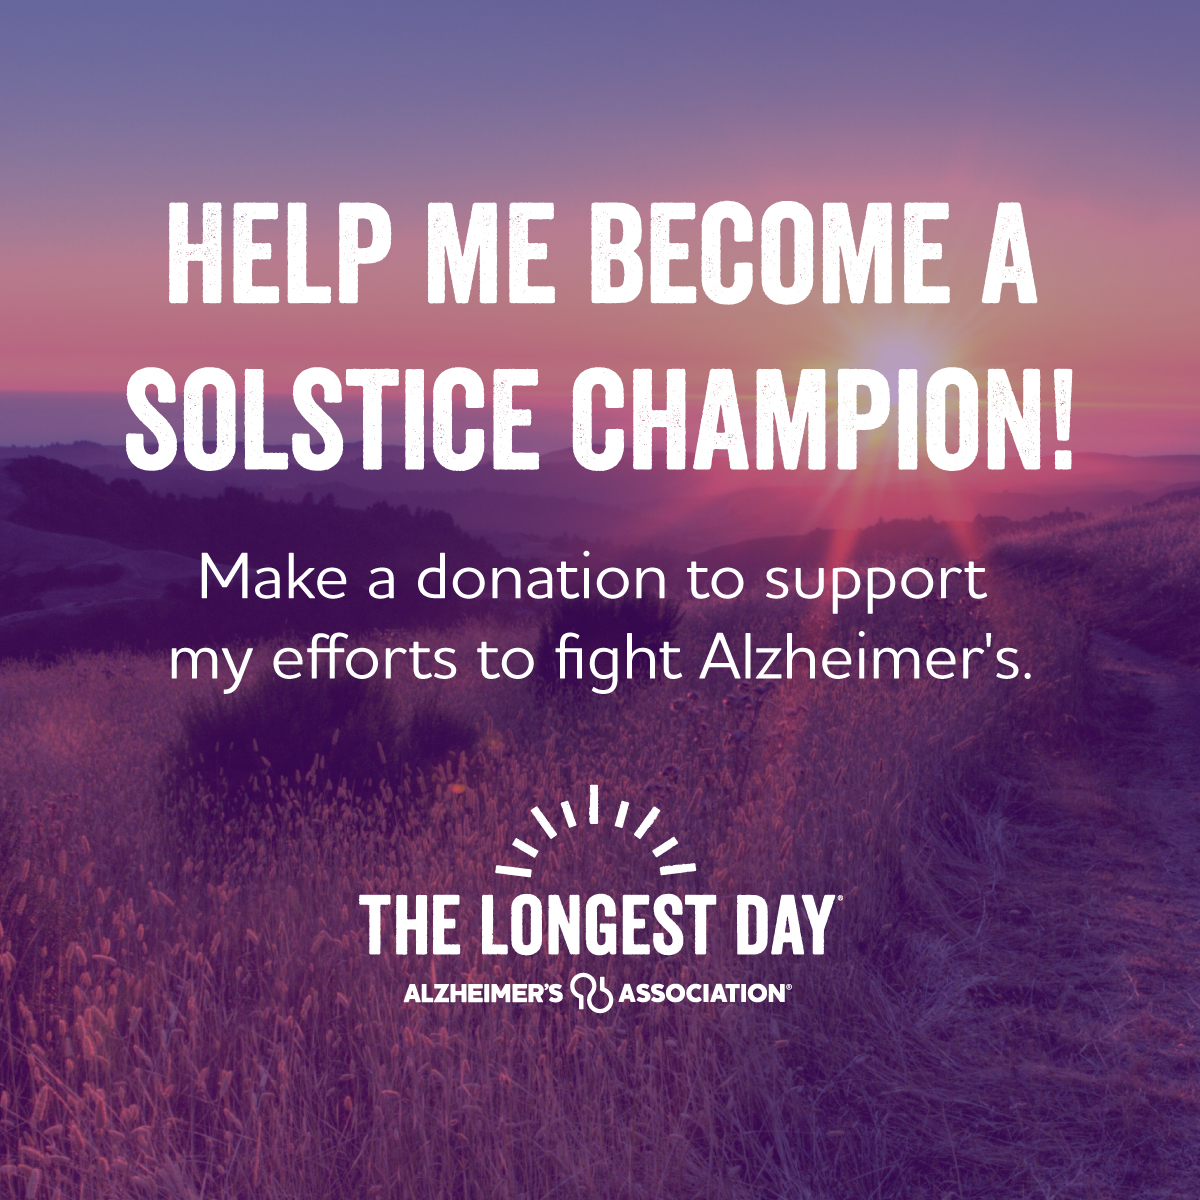 The Longest Day is the day with the most light — the summer solstice. On June 20, thousands of participants from across the world come together to fight the darkness of Alzheimer’s through a fundraising activity of their choice. #ENDALZ 1/5